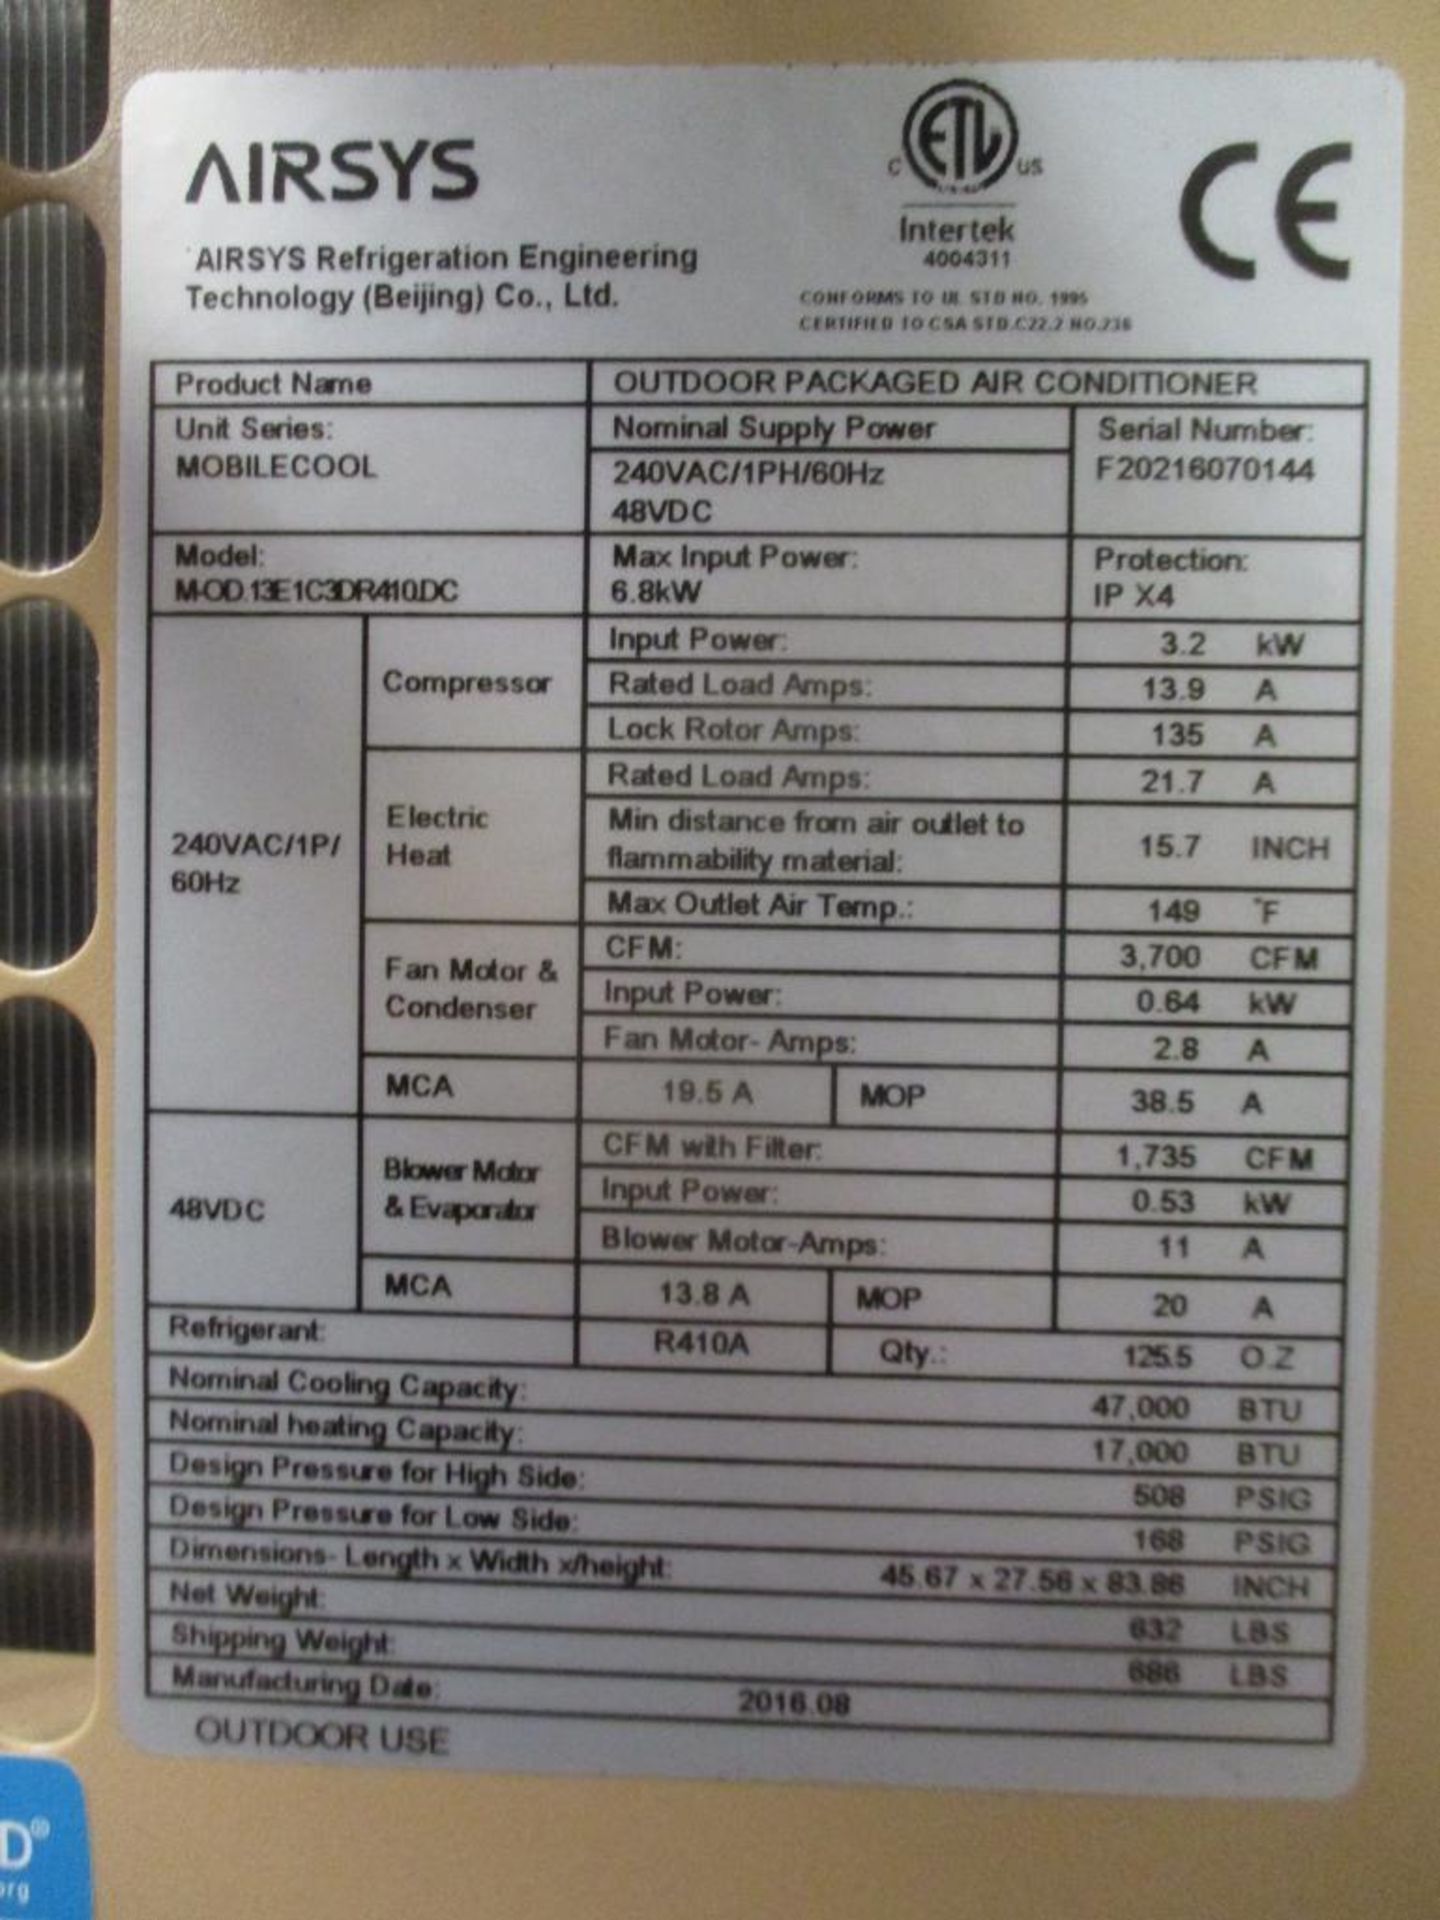 Airsys Outdoor Packaged Air Conditioner, Mobile Cool, Model MOD.13E1C3DR410DC (New) - Image 4 of 4